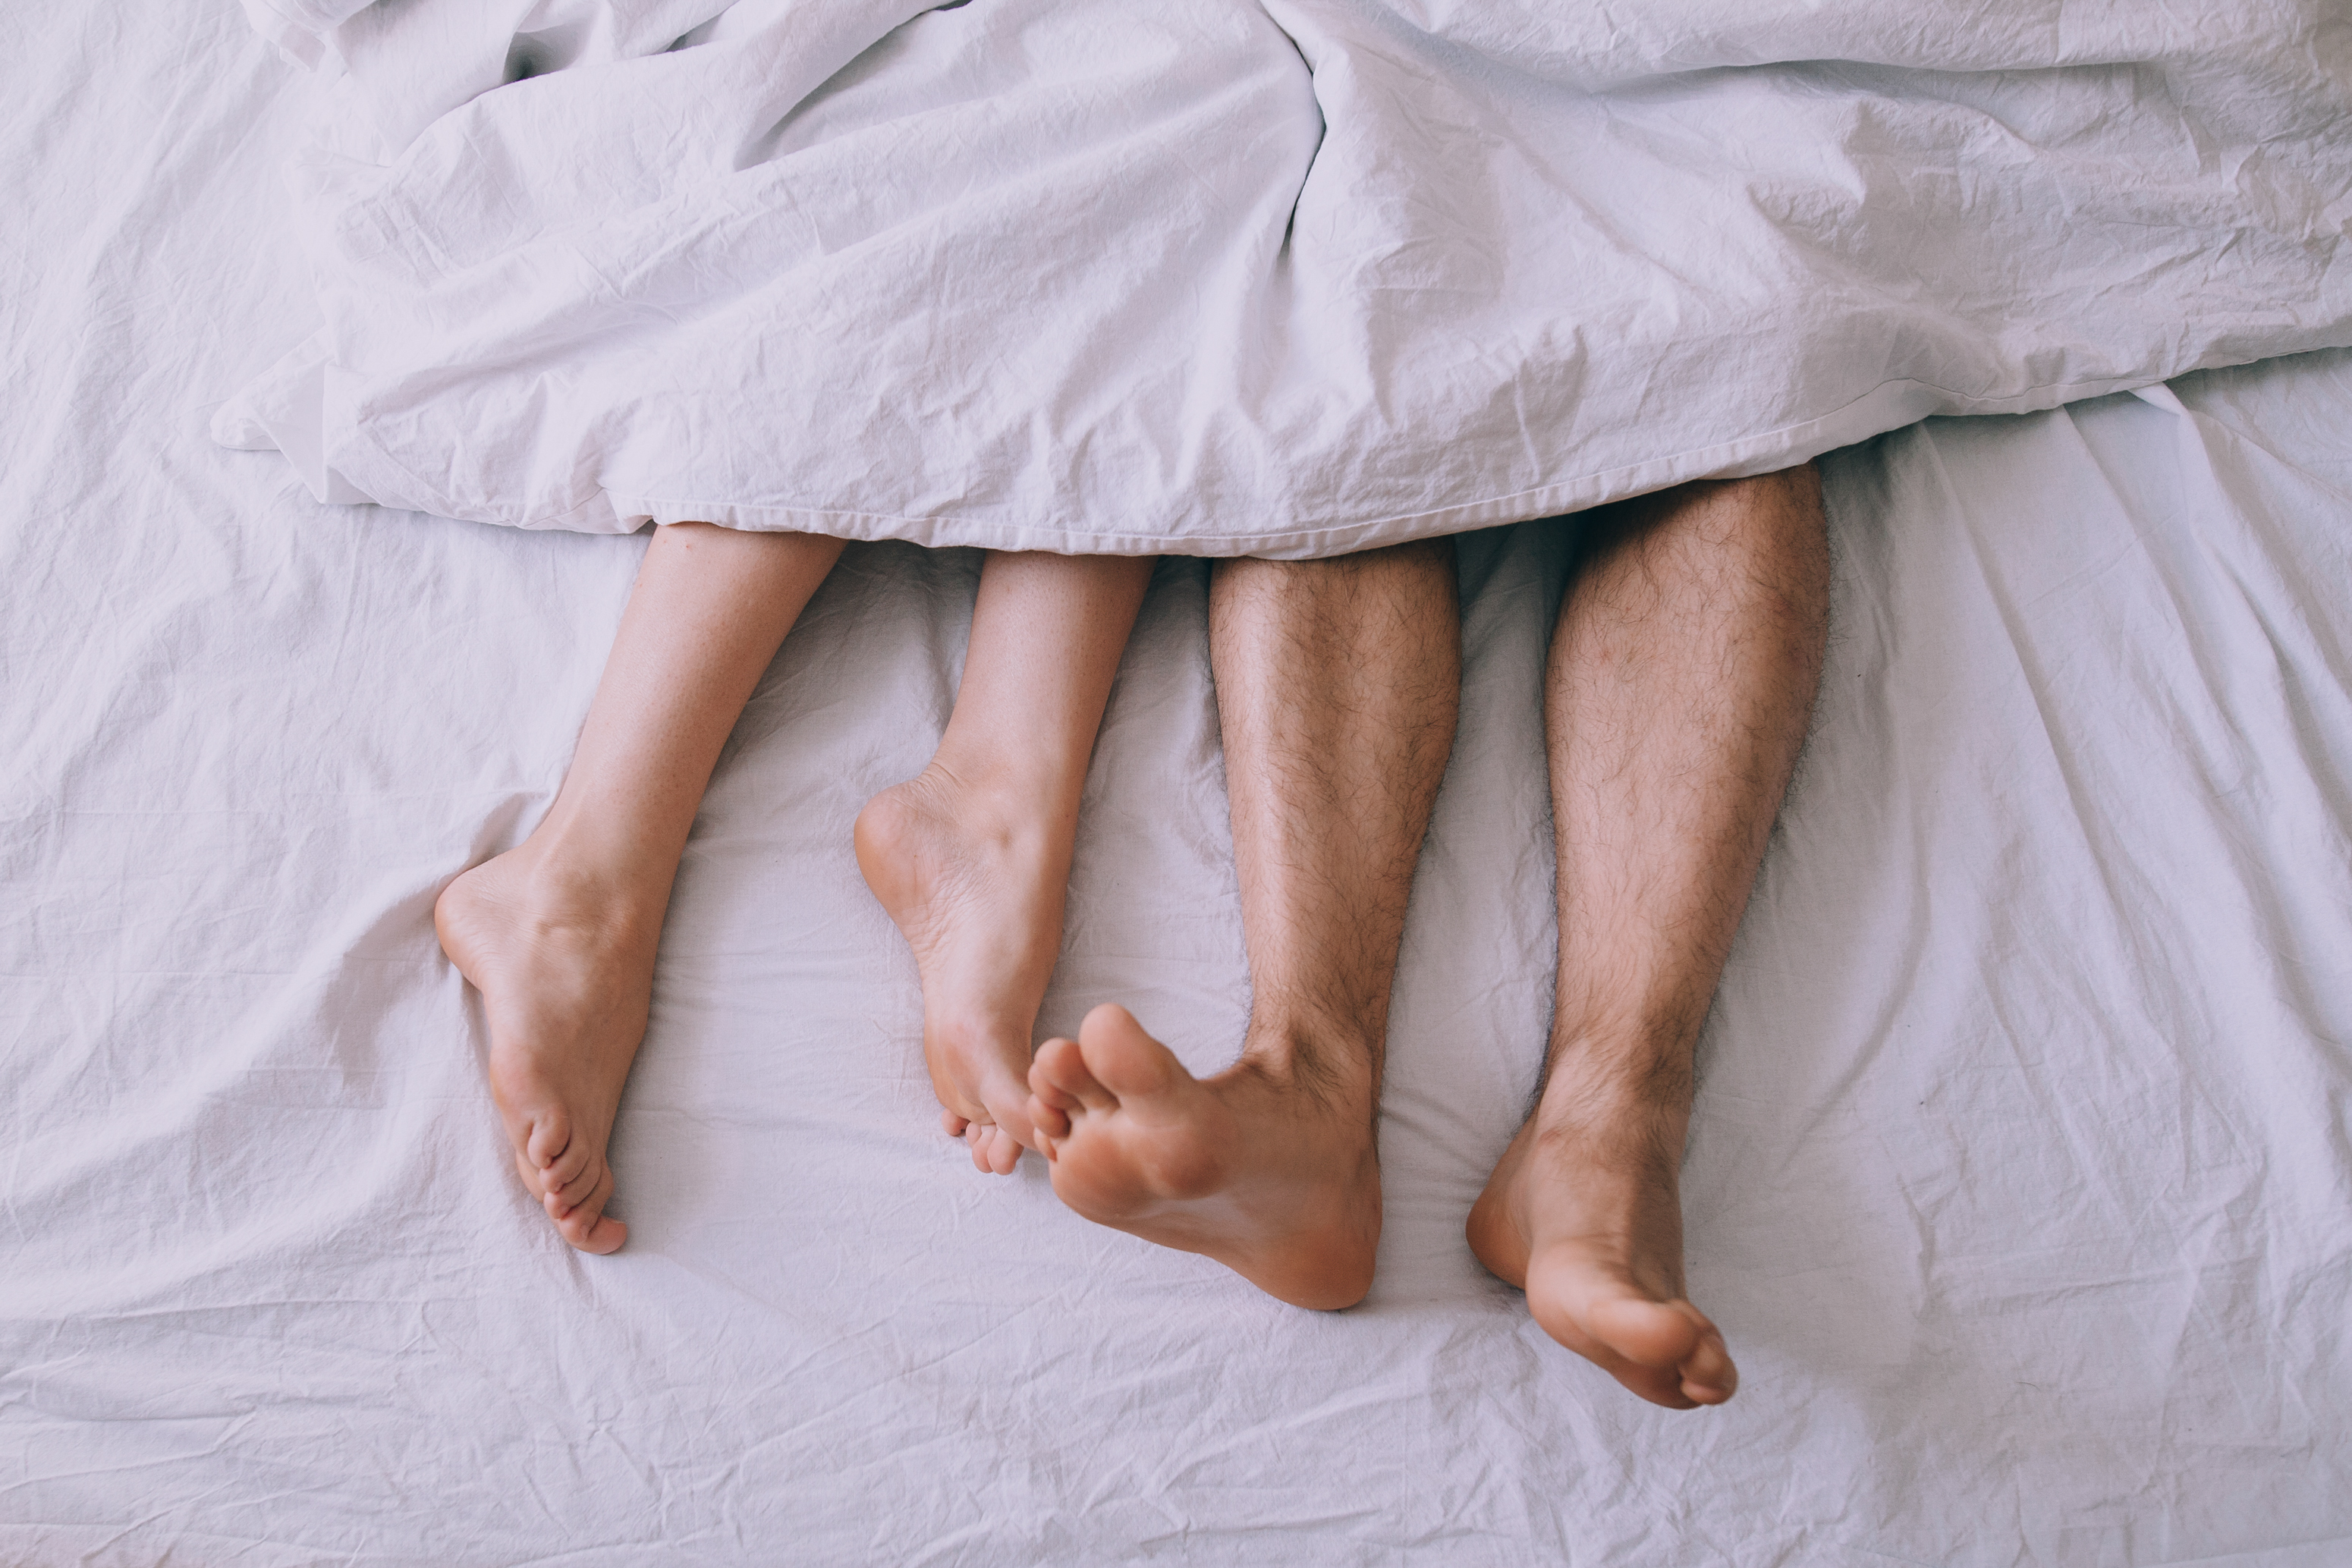 Couple sleeping together | Source: Shutterstock